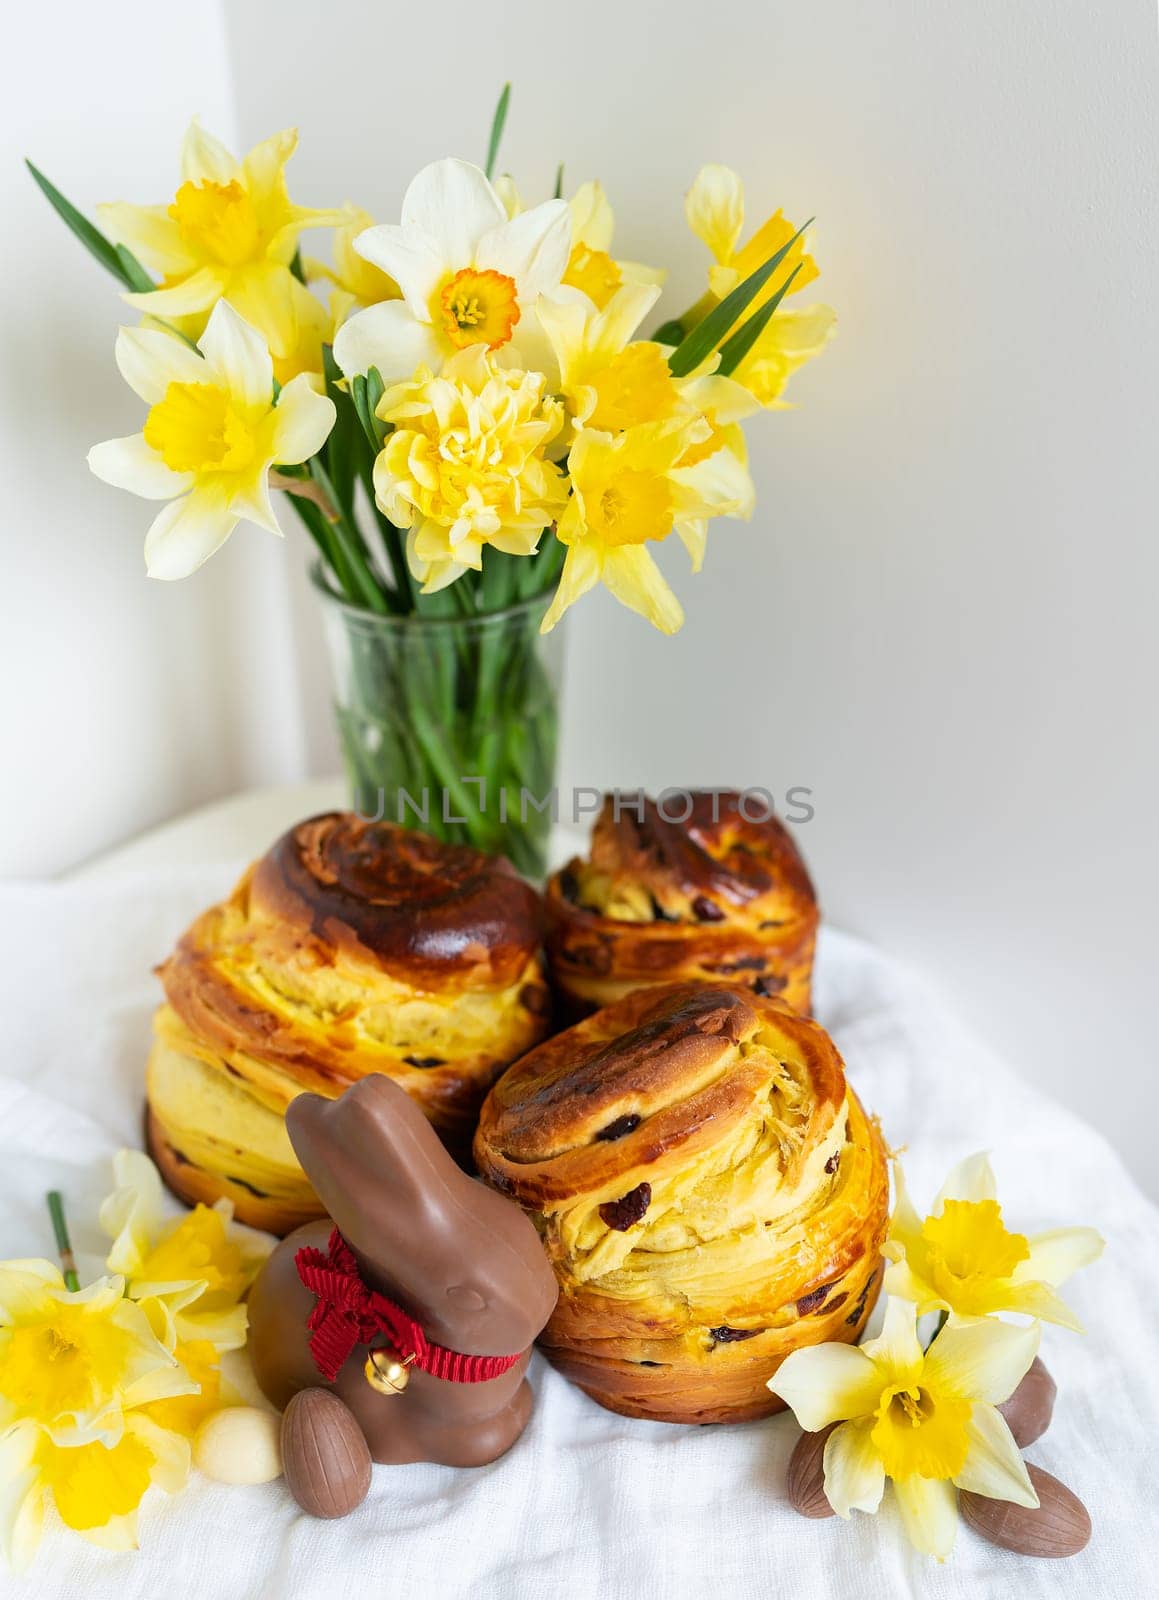 This vibrant image captures a delightful scene of Easter treats and spring vibes. Freshly baked pastries, a chocolate bunny, and colorful daffodils create a festive atmosphere